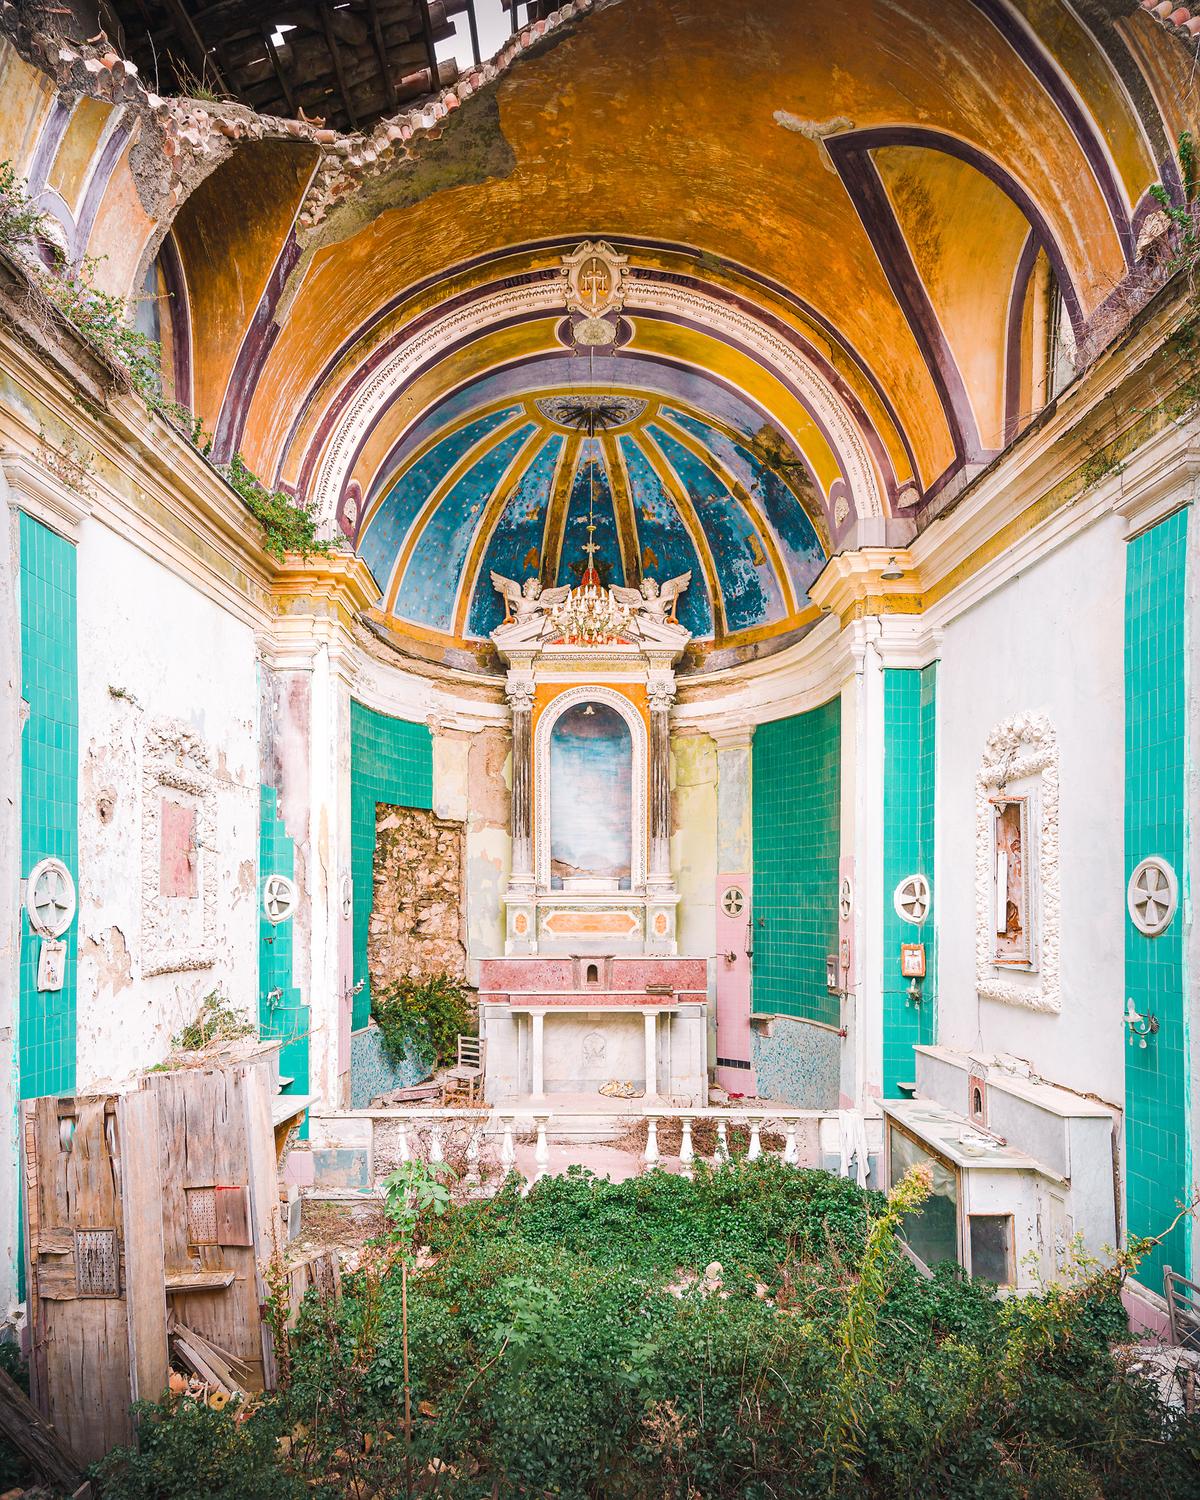 A dilapidated church in Italy, photographed in 2022. (Courtesy of <a href="https://romanrobroek.nl/">Roman Robroek Photography</a> and <a href="https://www.instagram.com/romanrobroek/">@romanrobroek</a>)